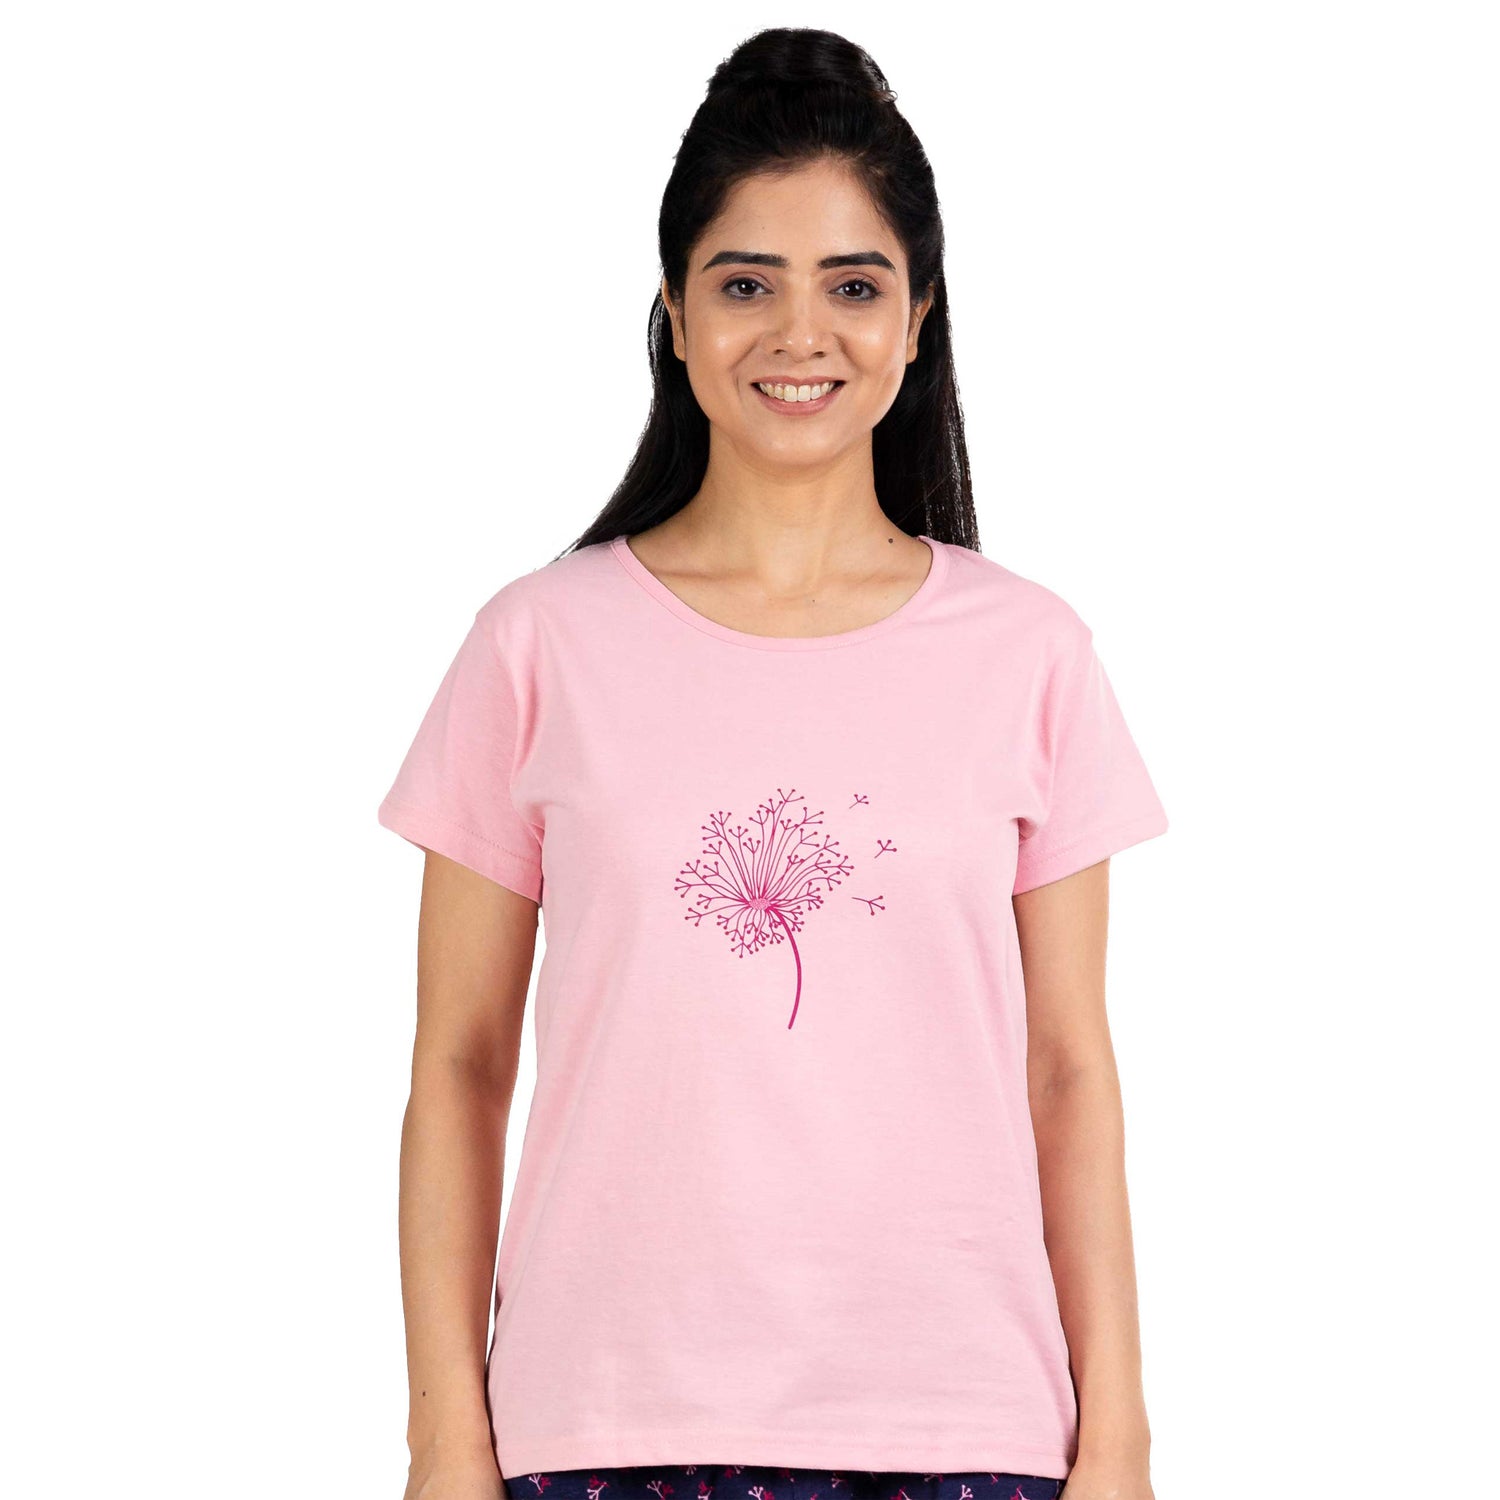 Baby pink color tshirt for women with round neck and short sleeves